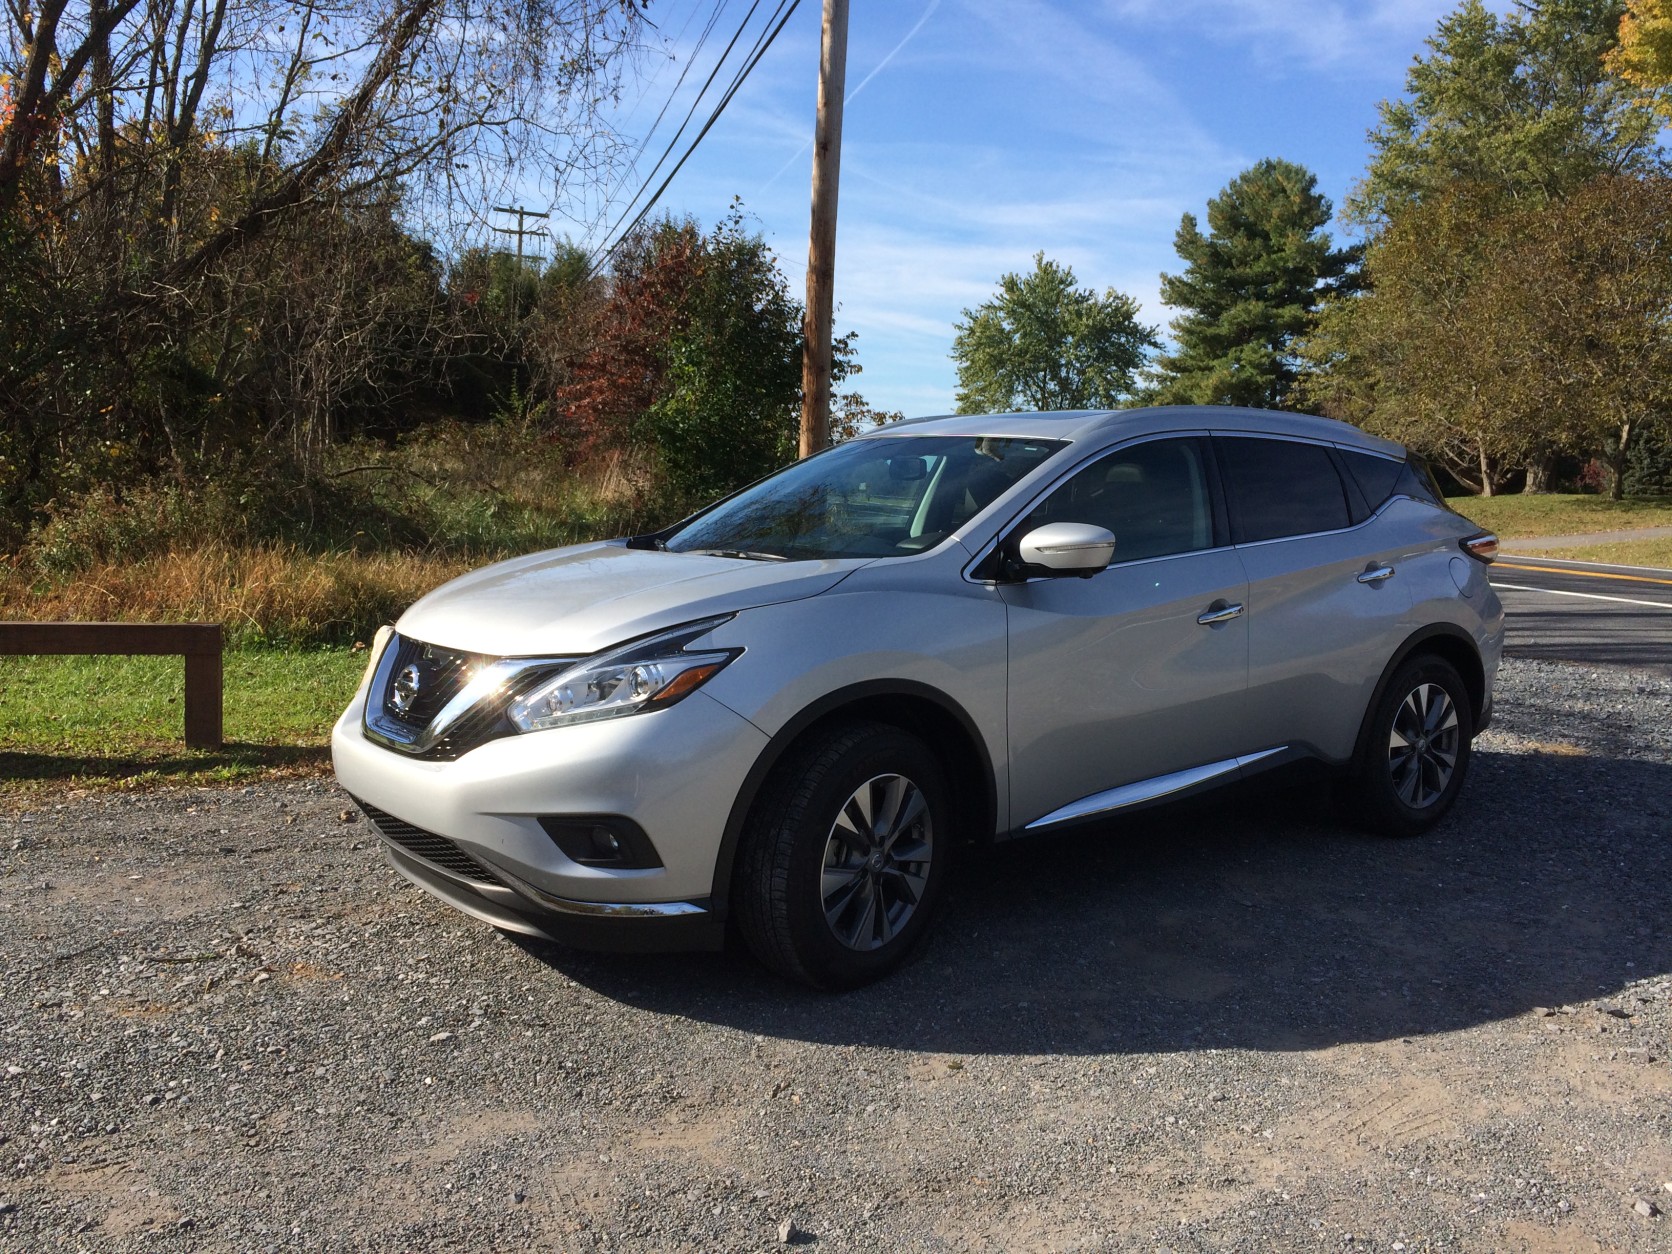 The sides of the new Murano have creases and bulges to keep your interest, and even the rear windows behind the rear doors look like they wrap around the vehicle. (WTOP/Mike Parris)